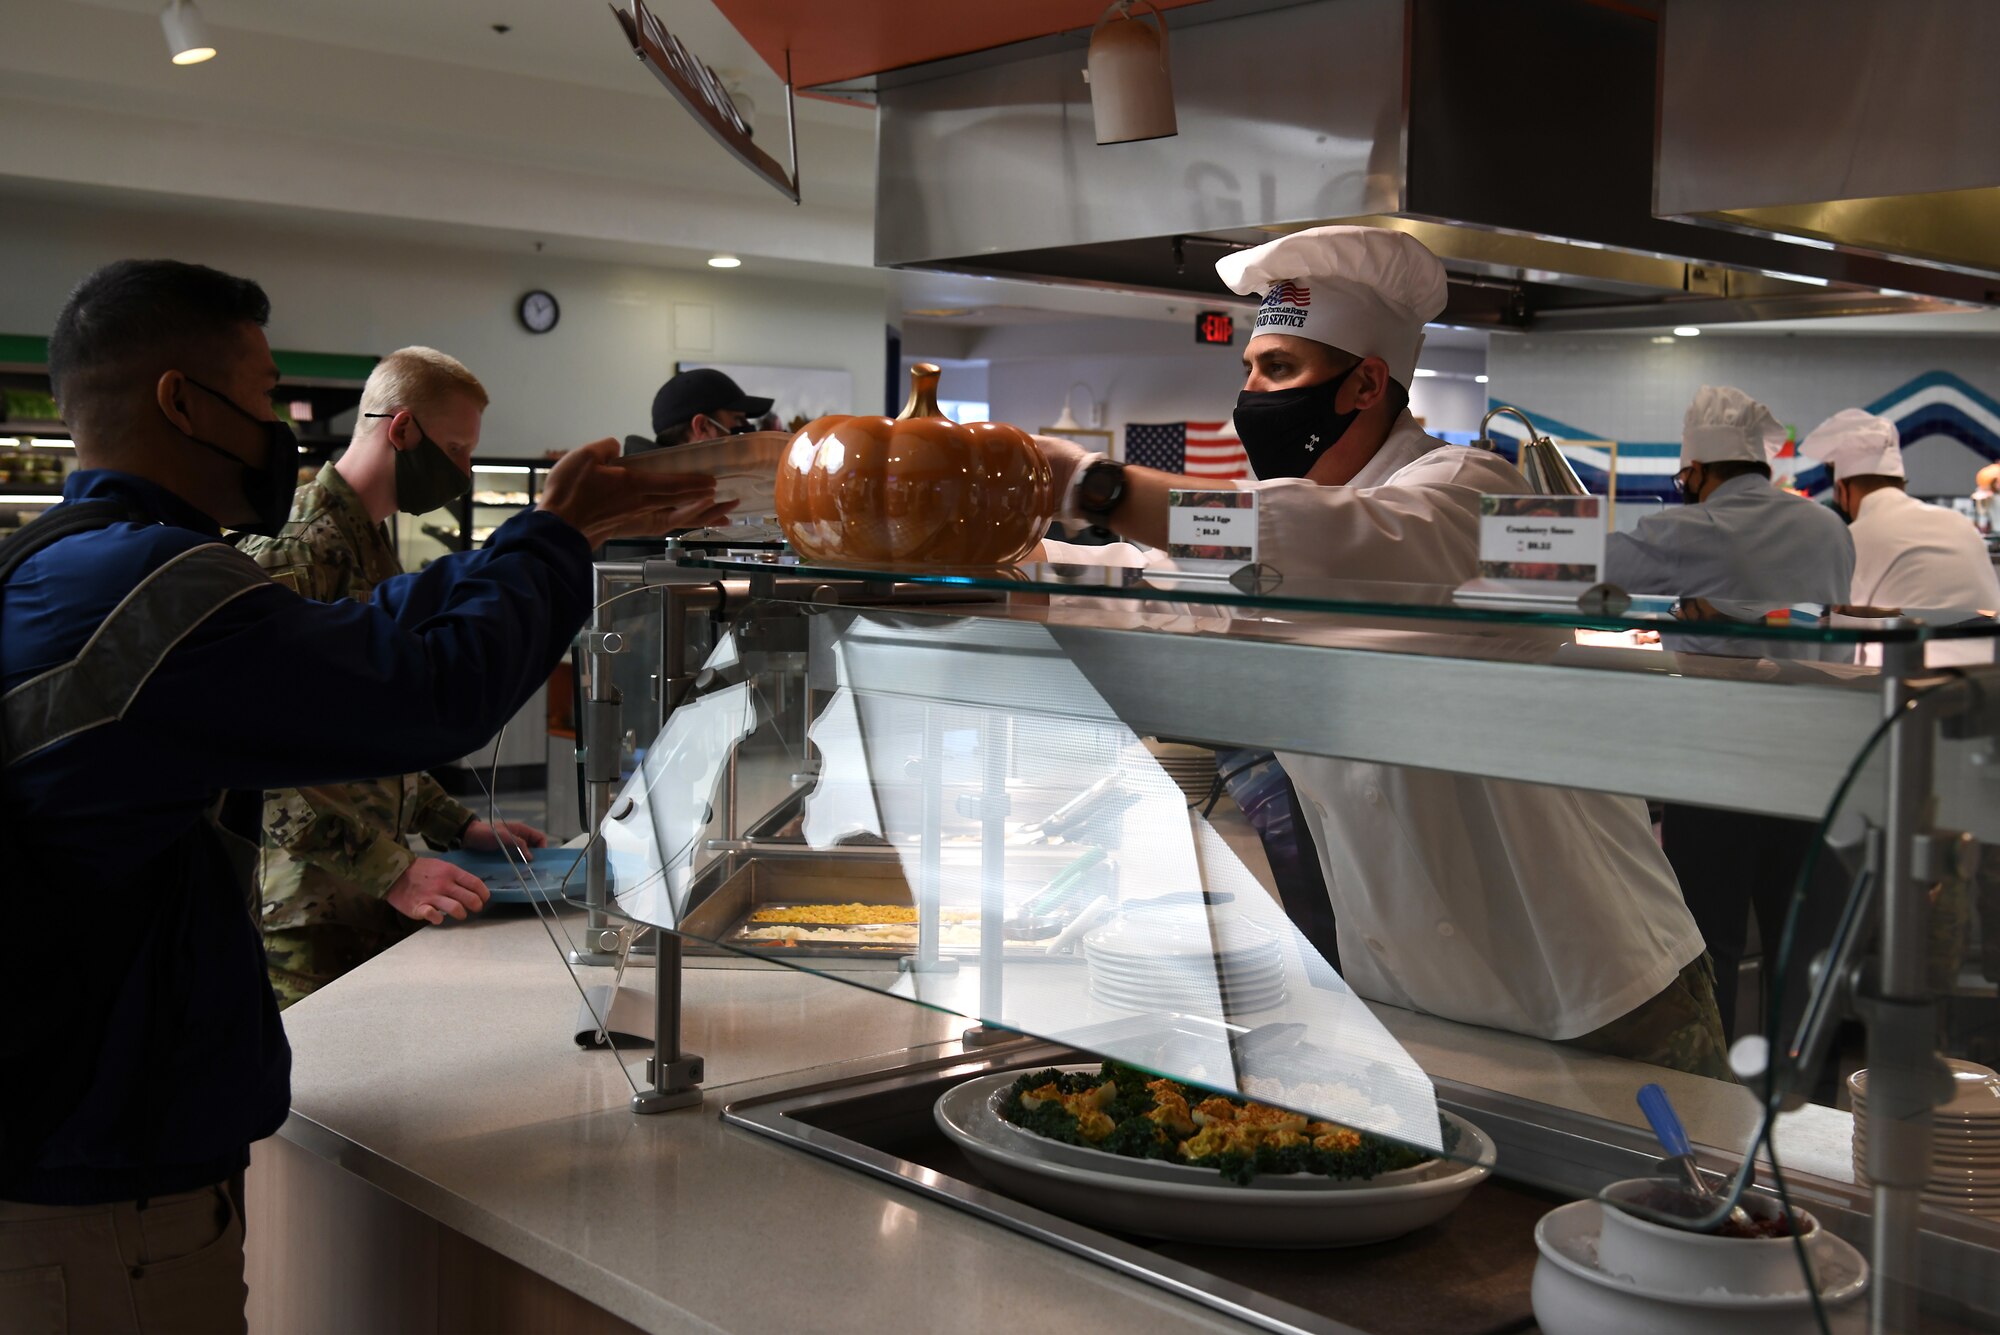 Chief Master Sgt. Jason Delucy, 30th SW command chief, serves Thanksgiving meals to service members and base members at the Breakers Dining Facility Nov. 26, 2020, at Vandenberg Air Force Base, Calif.